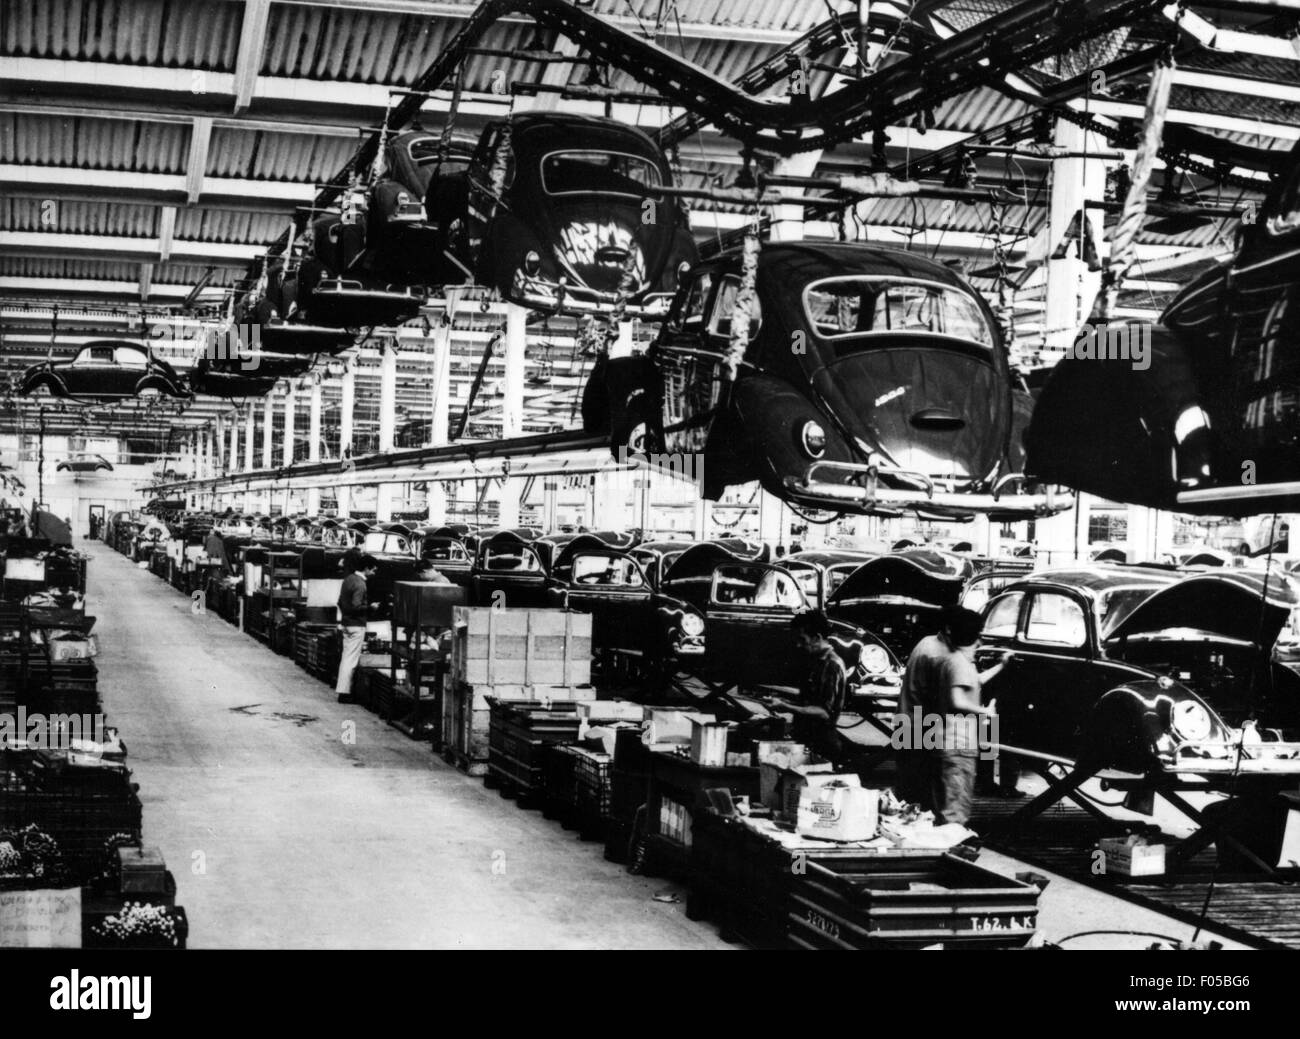 industry,car industry,production of the VW beetle,Sao Bernardo do Campo,1970 20th century,1970s,70s,Sao Paulo,Brazil,South America,assembly line,production line,assembly lines,production lines,assemble,worker,workers,working,labouring,laboring,labour,labor,manufacture,production,factory,foundry,production plant,manufacturing plant,factories,foundries,production plants,manufacturing plants,business,work,works,motor car,auto,passenger car,motorcar,motorcars,autos,passenger cars,cars,car,autocar,automobile,autocars,au,Additional-Rights-Clearences-Not Available Stock Photo